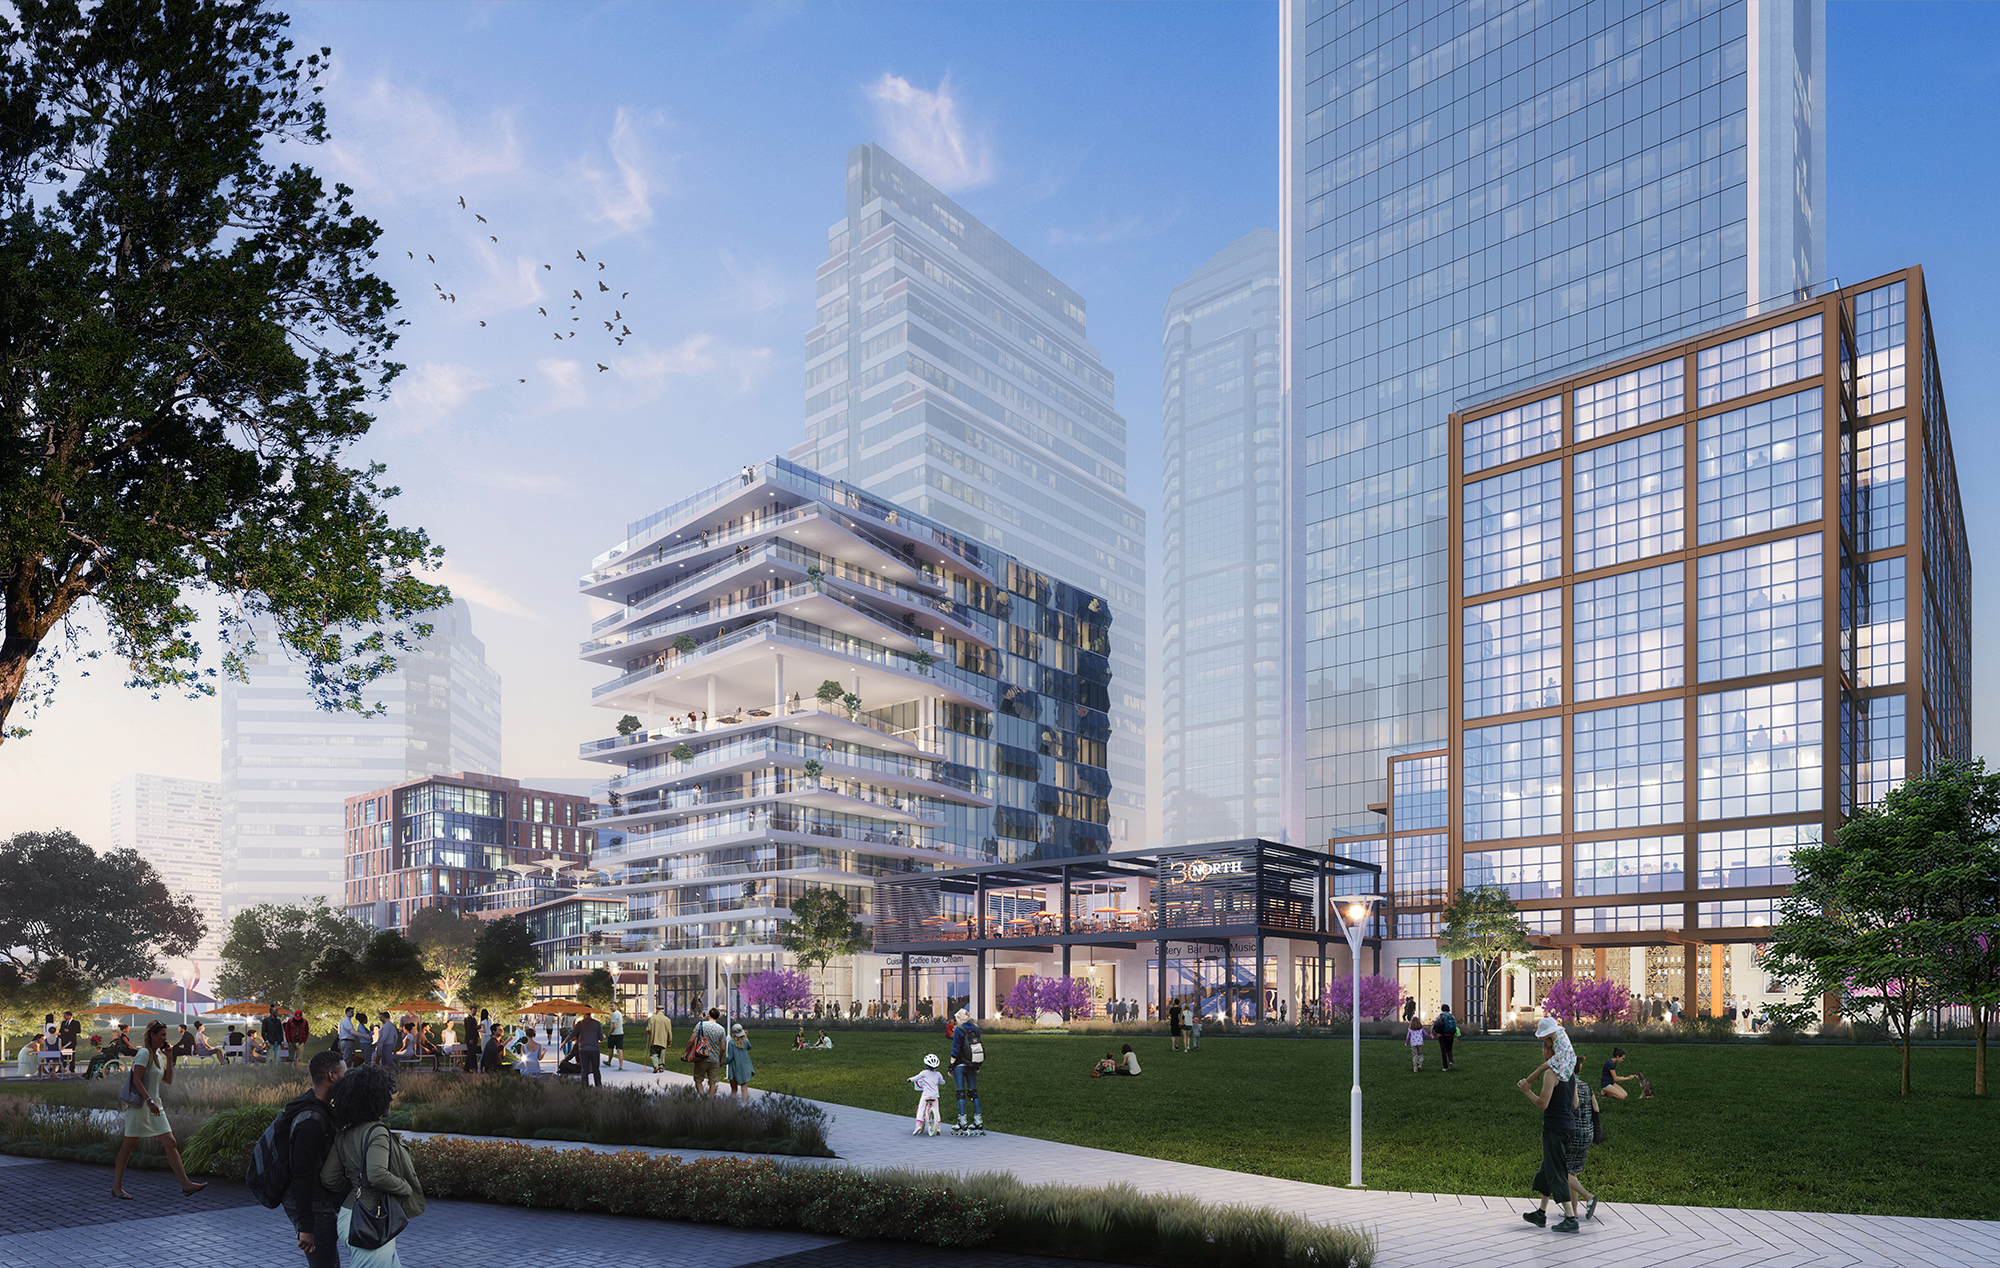 The proposal includes a requested $536 million taxpayer investment in the public-private partnership with the DIA and city to supplement a $559 million private developer investment.